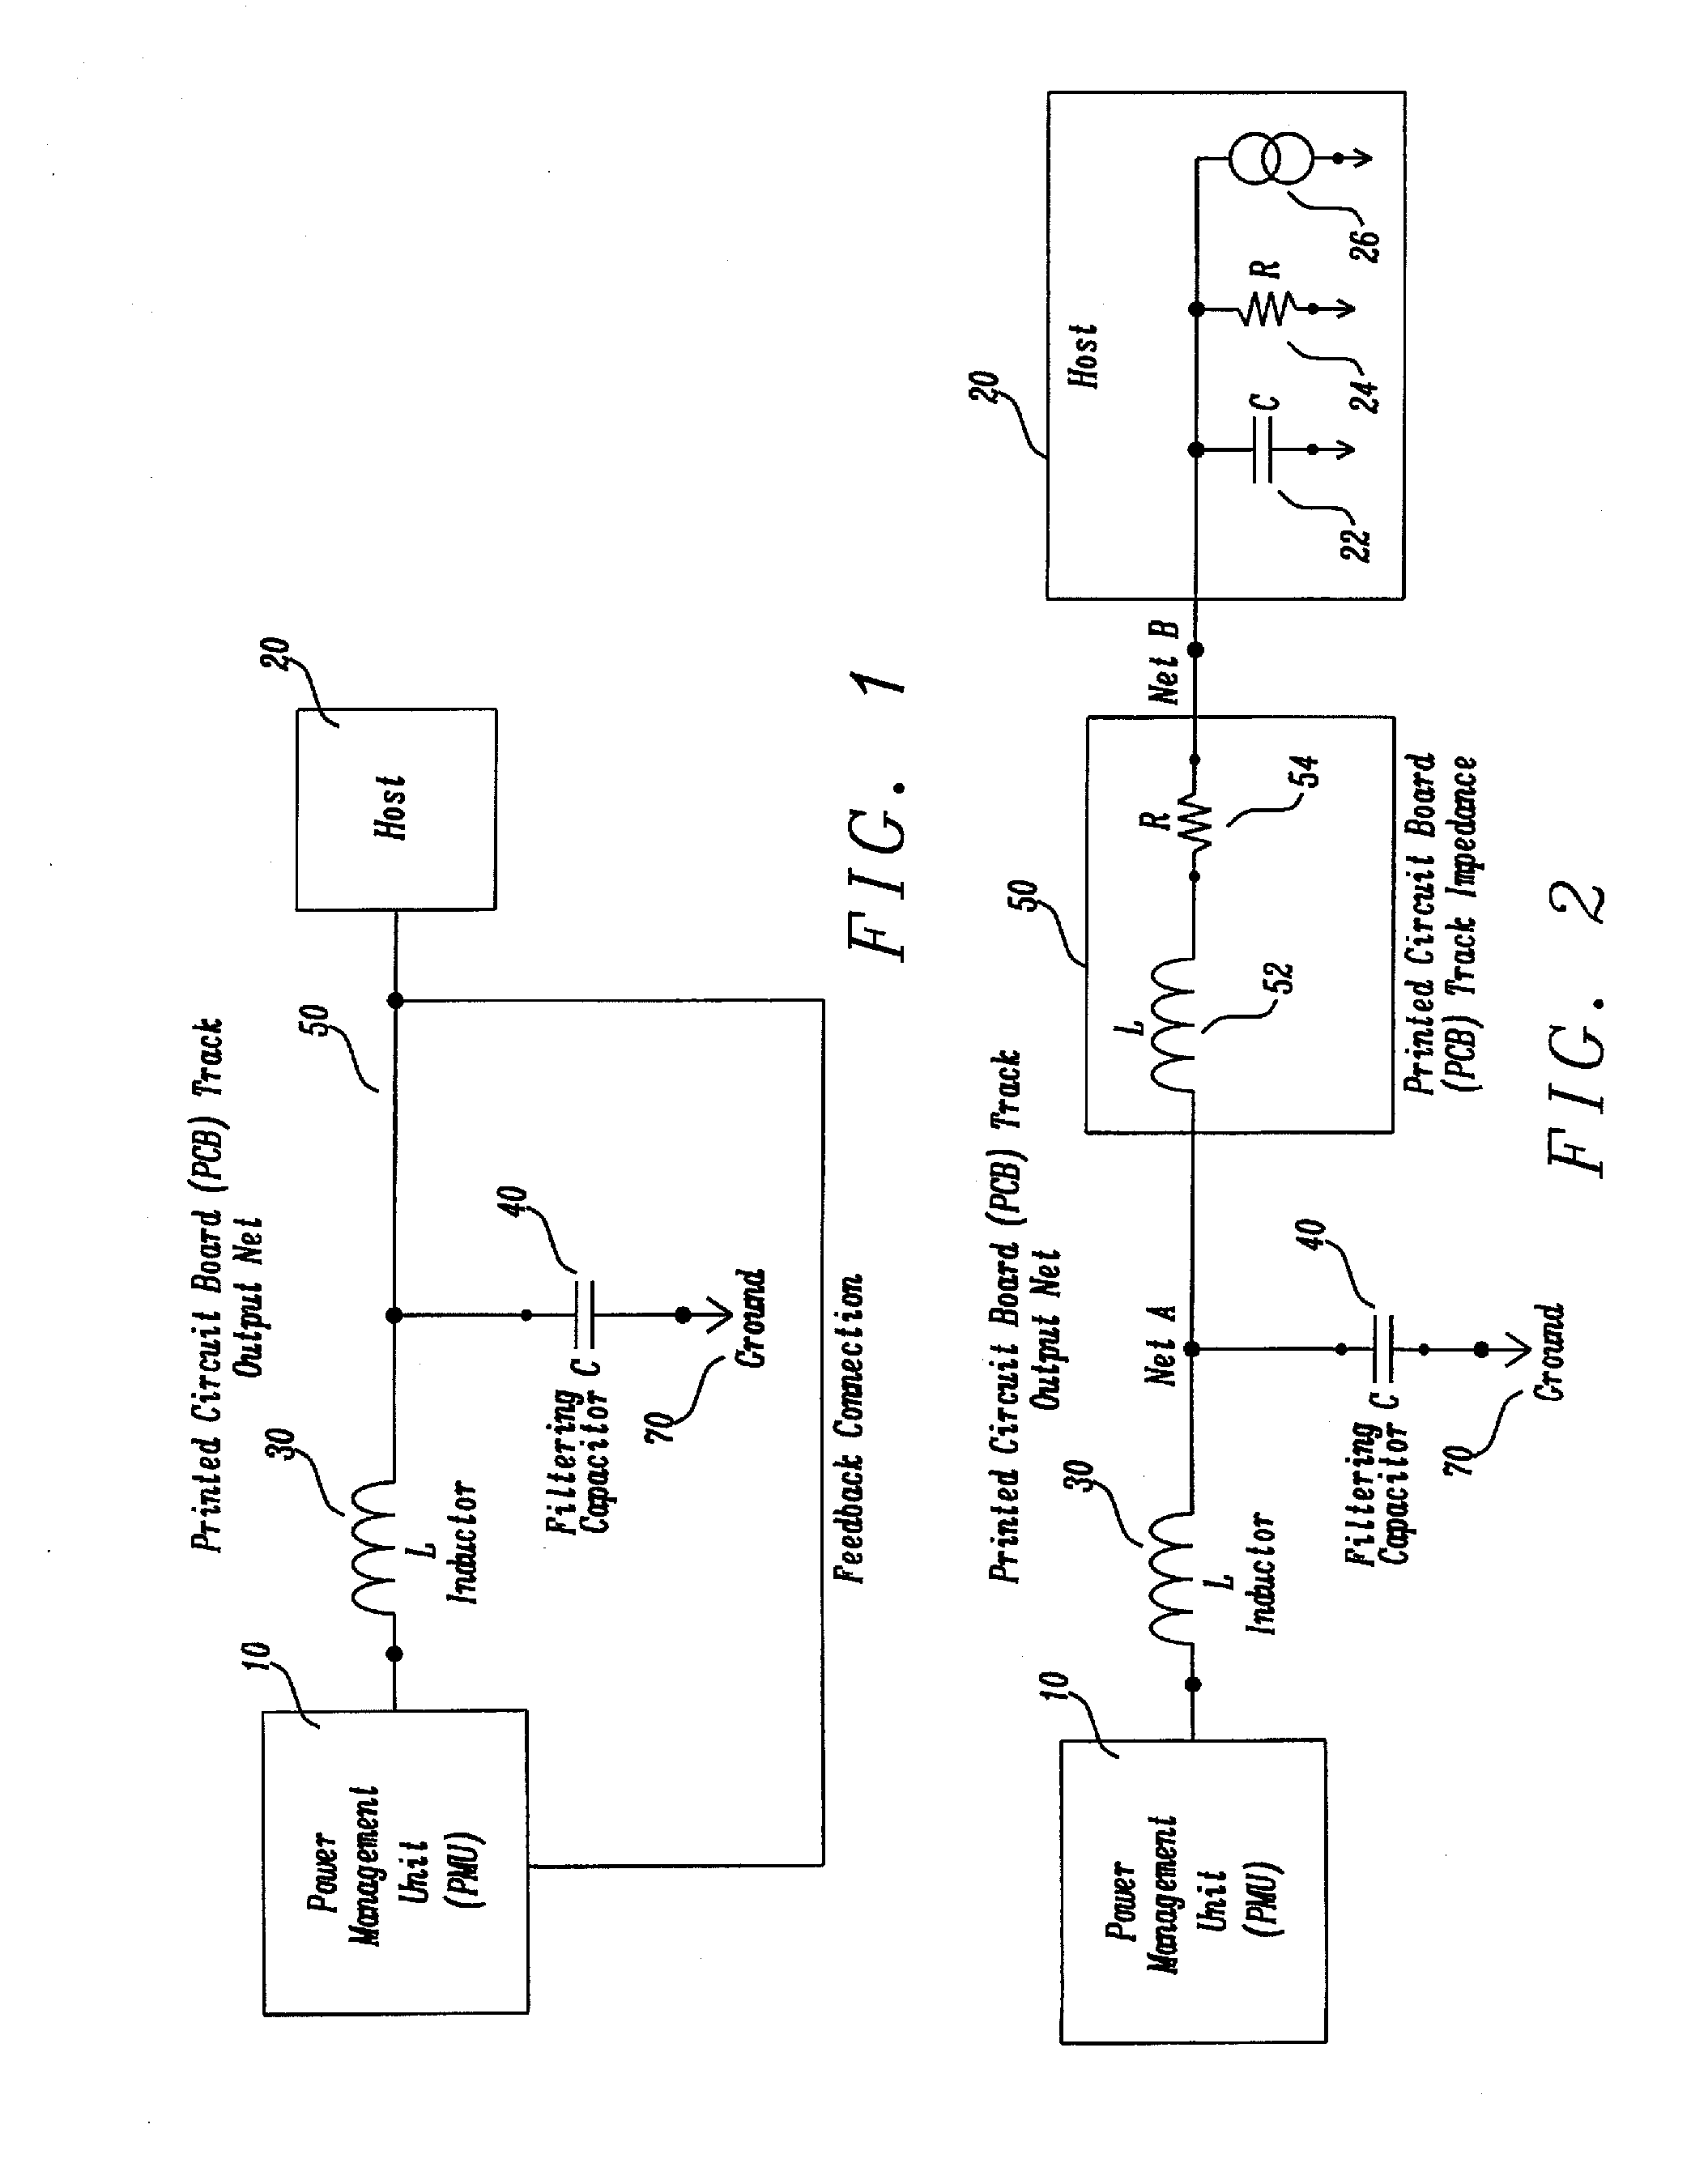 Apparatus, System and Method for Voltage Regulator with an Improved Voltage Regulation Using a Remote Feedback Loop and Filter